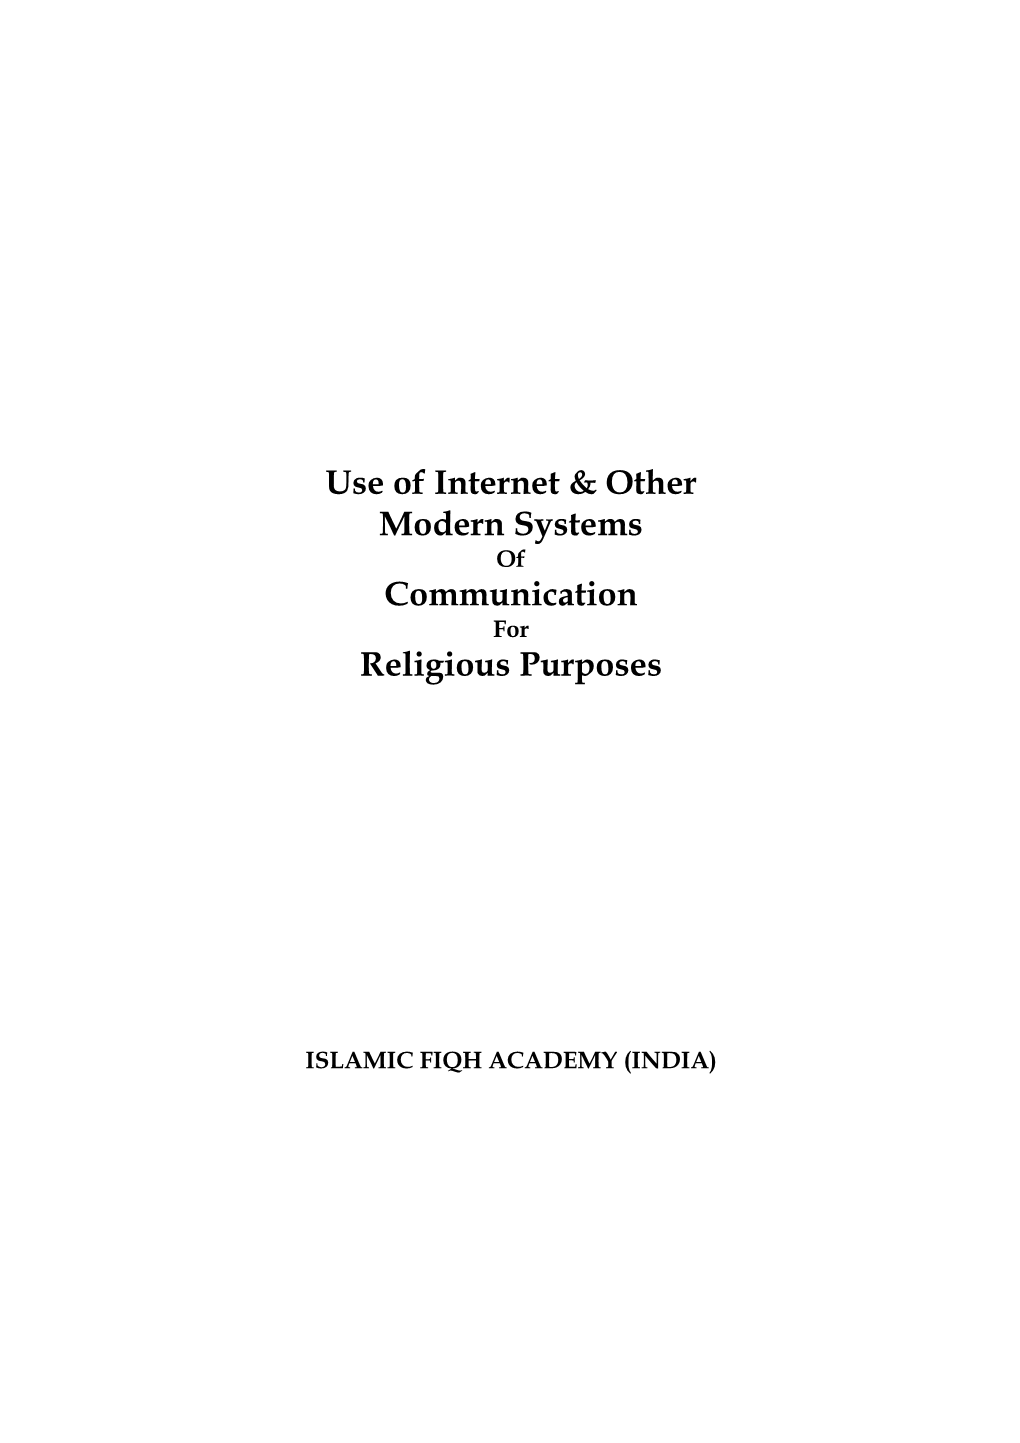 Use of Internet & Other Modern Systems Communication Religious